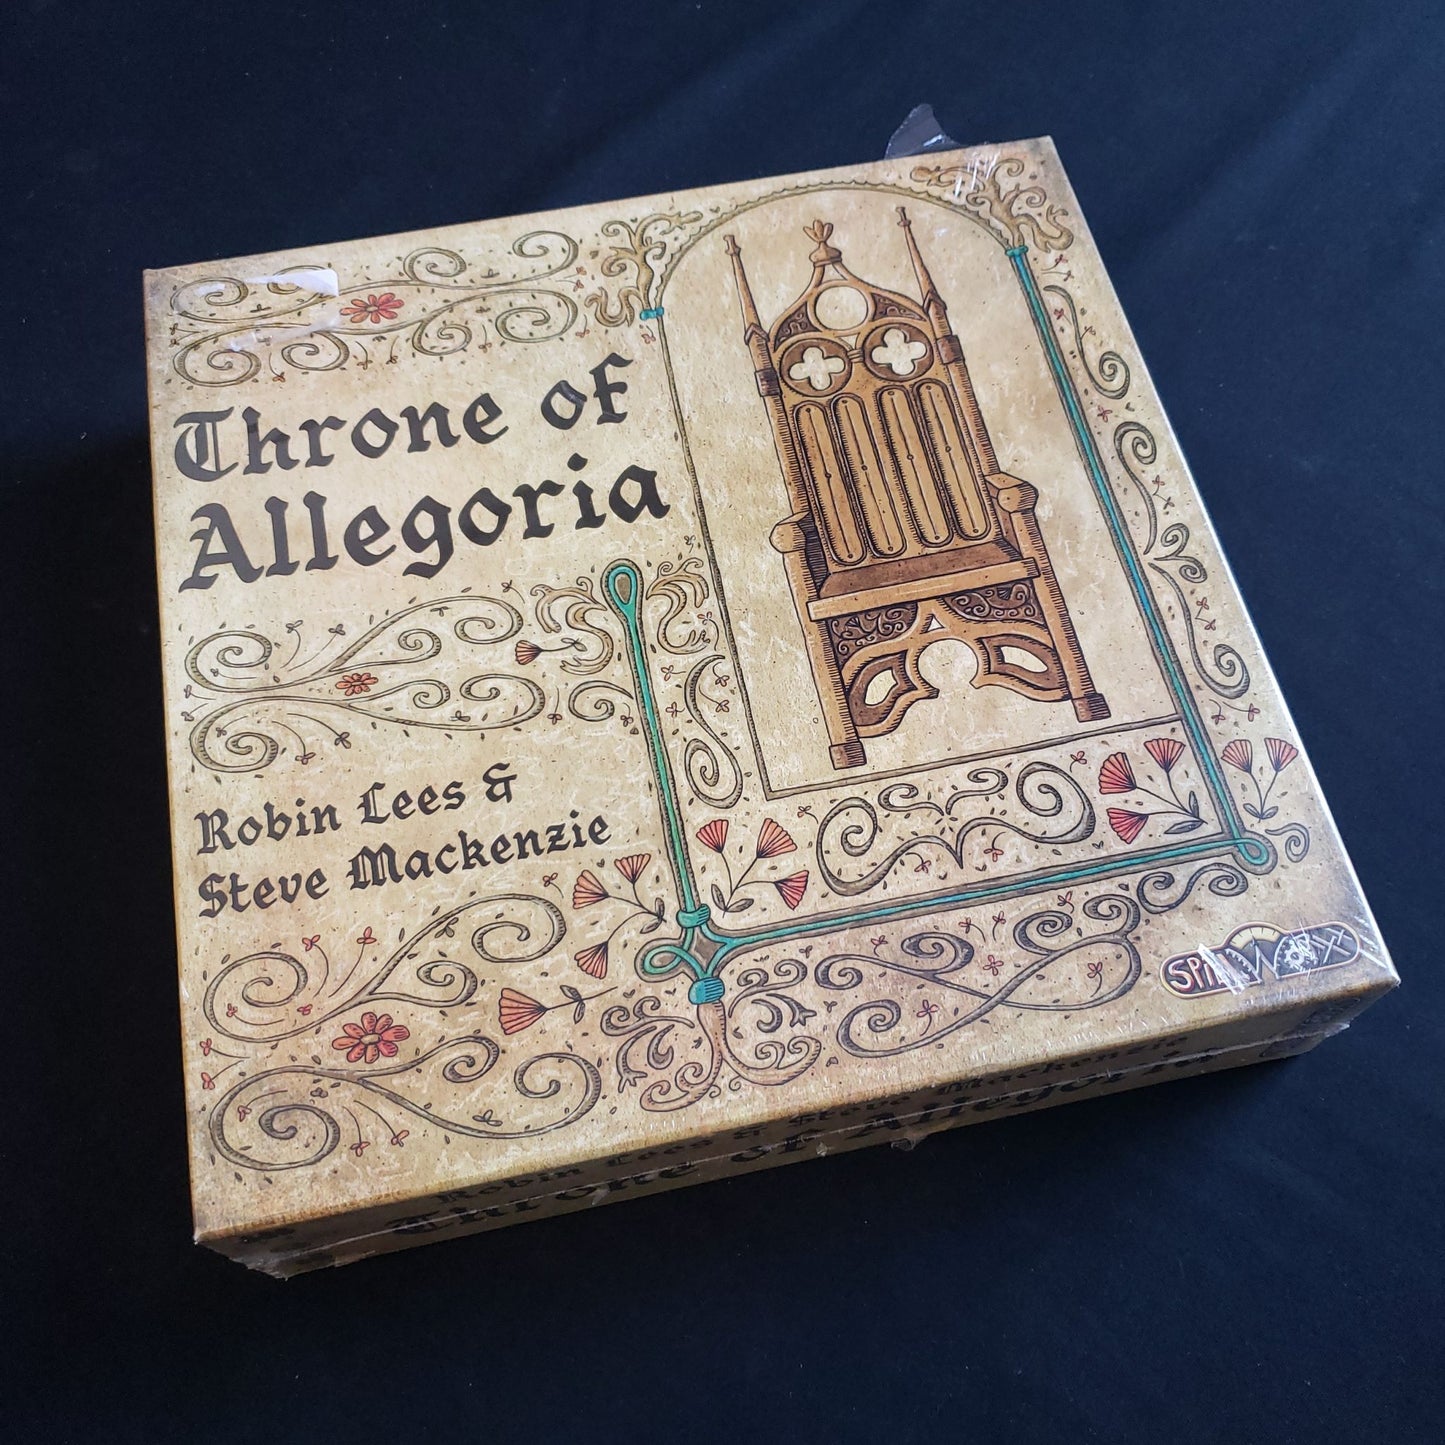 Throne Of Allegoria board game - front cover of box